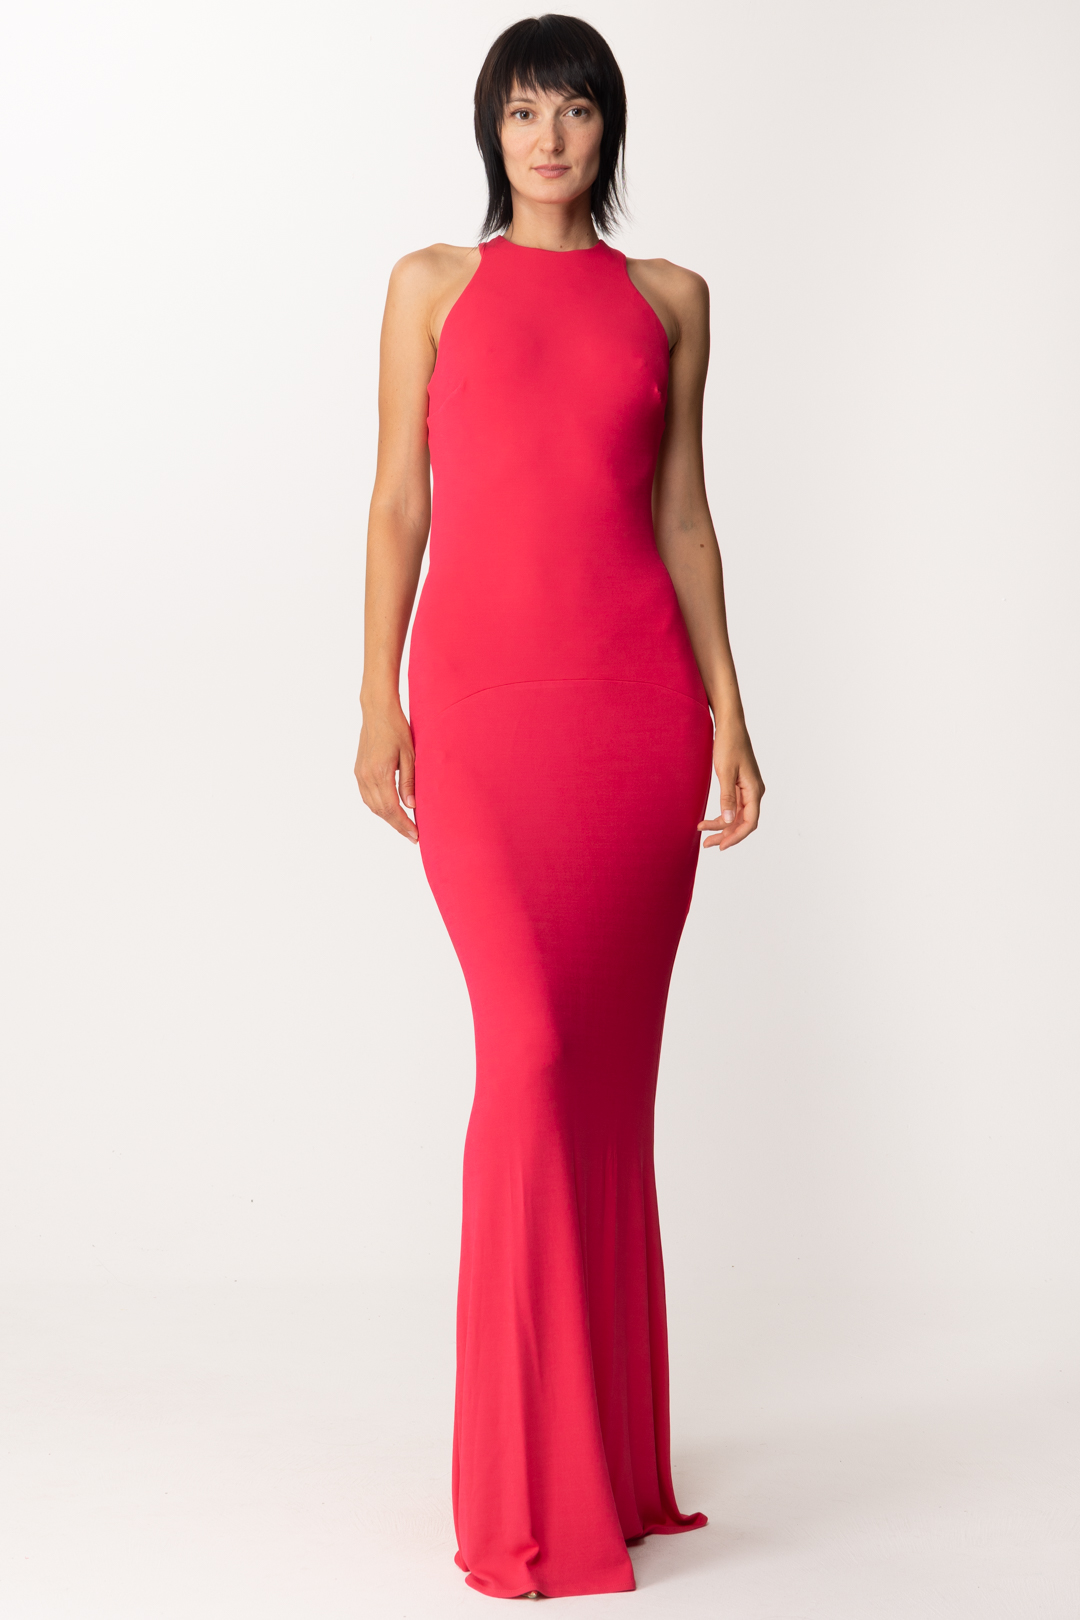 Preview: Elisabetta Franchi Red Carpet dress with neckline and jewel on the back Fuxia